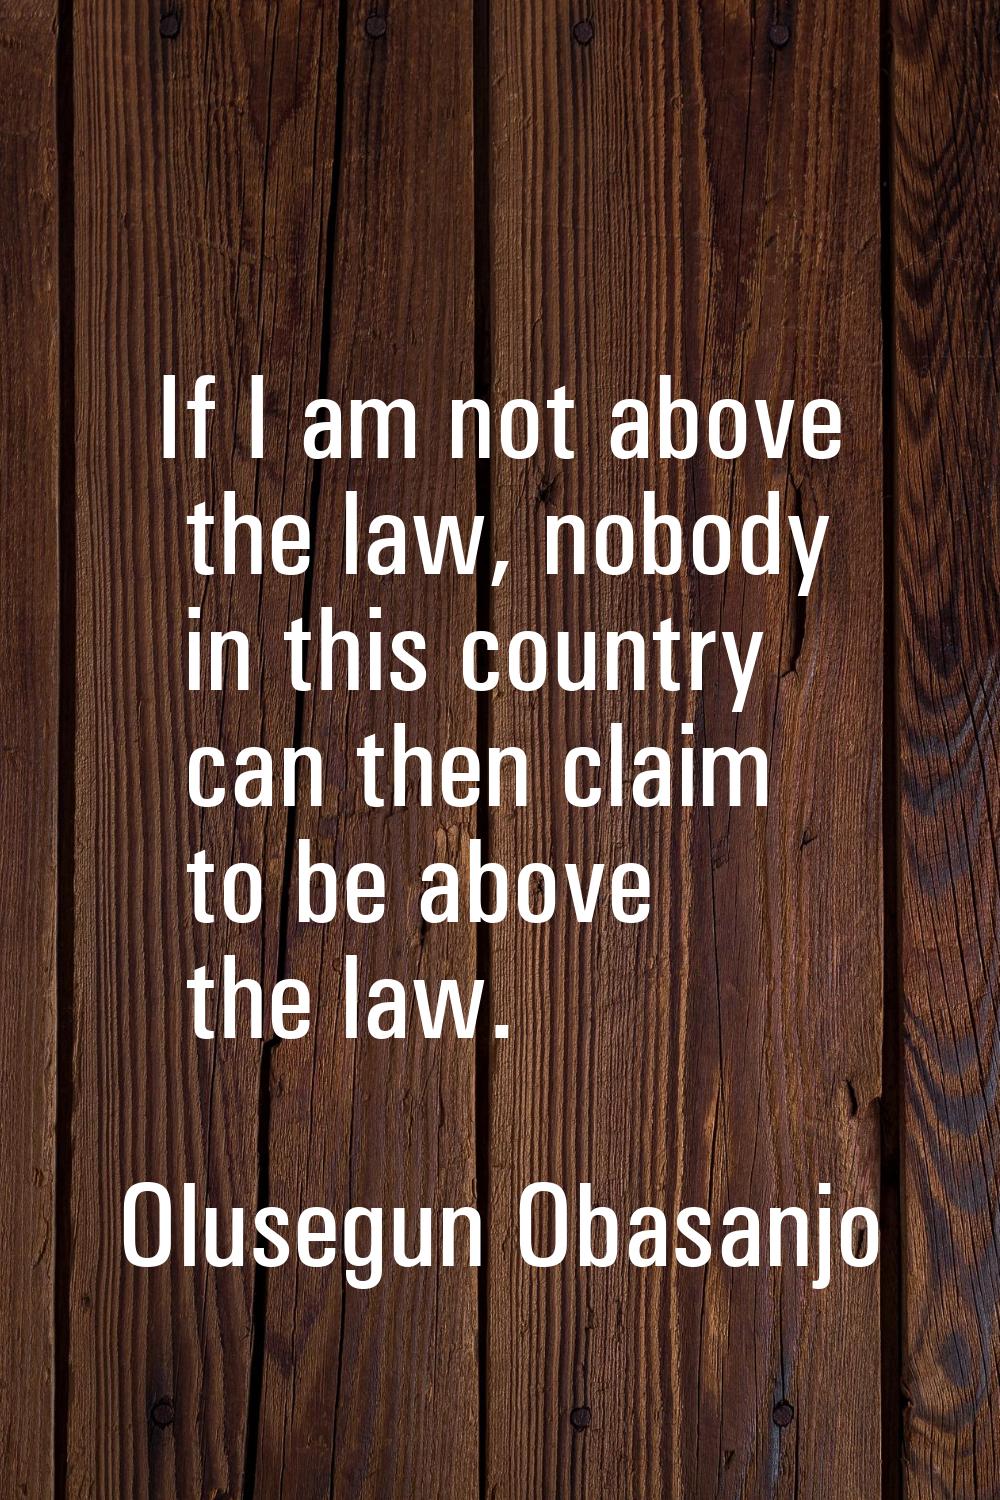 If I am not above the law, nobody in this country can then claim to be above the law.